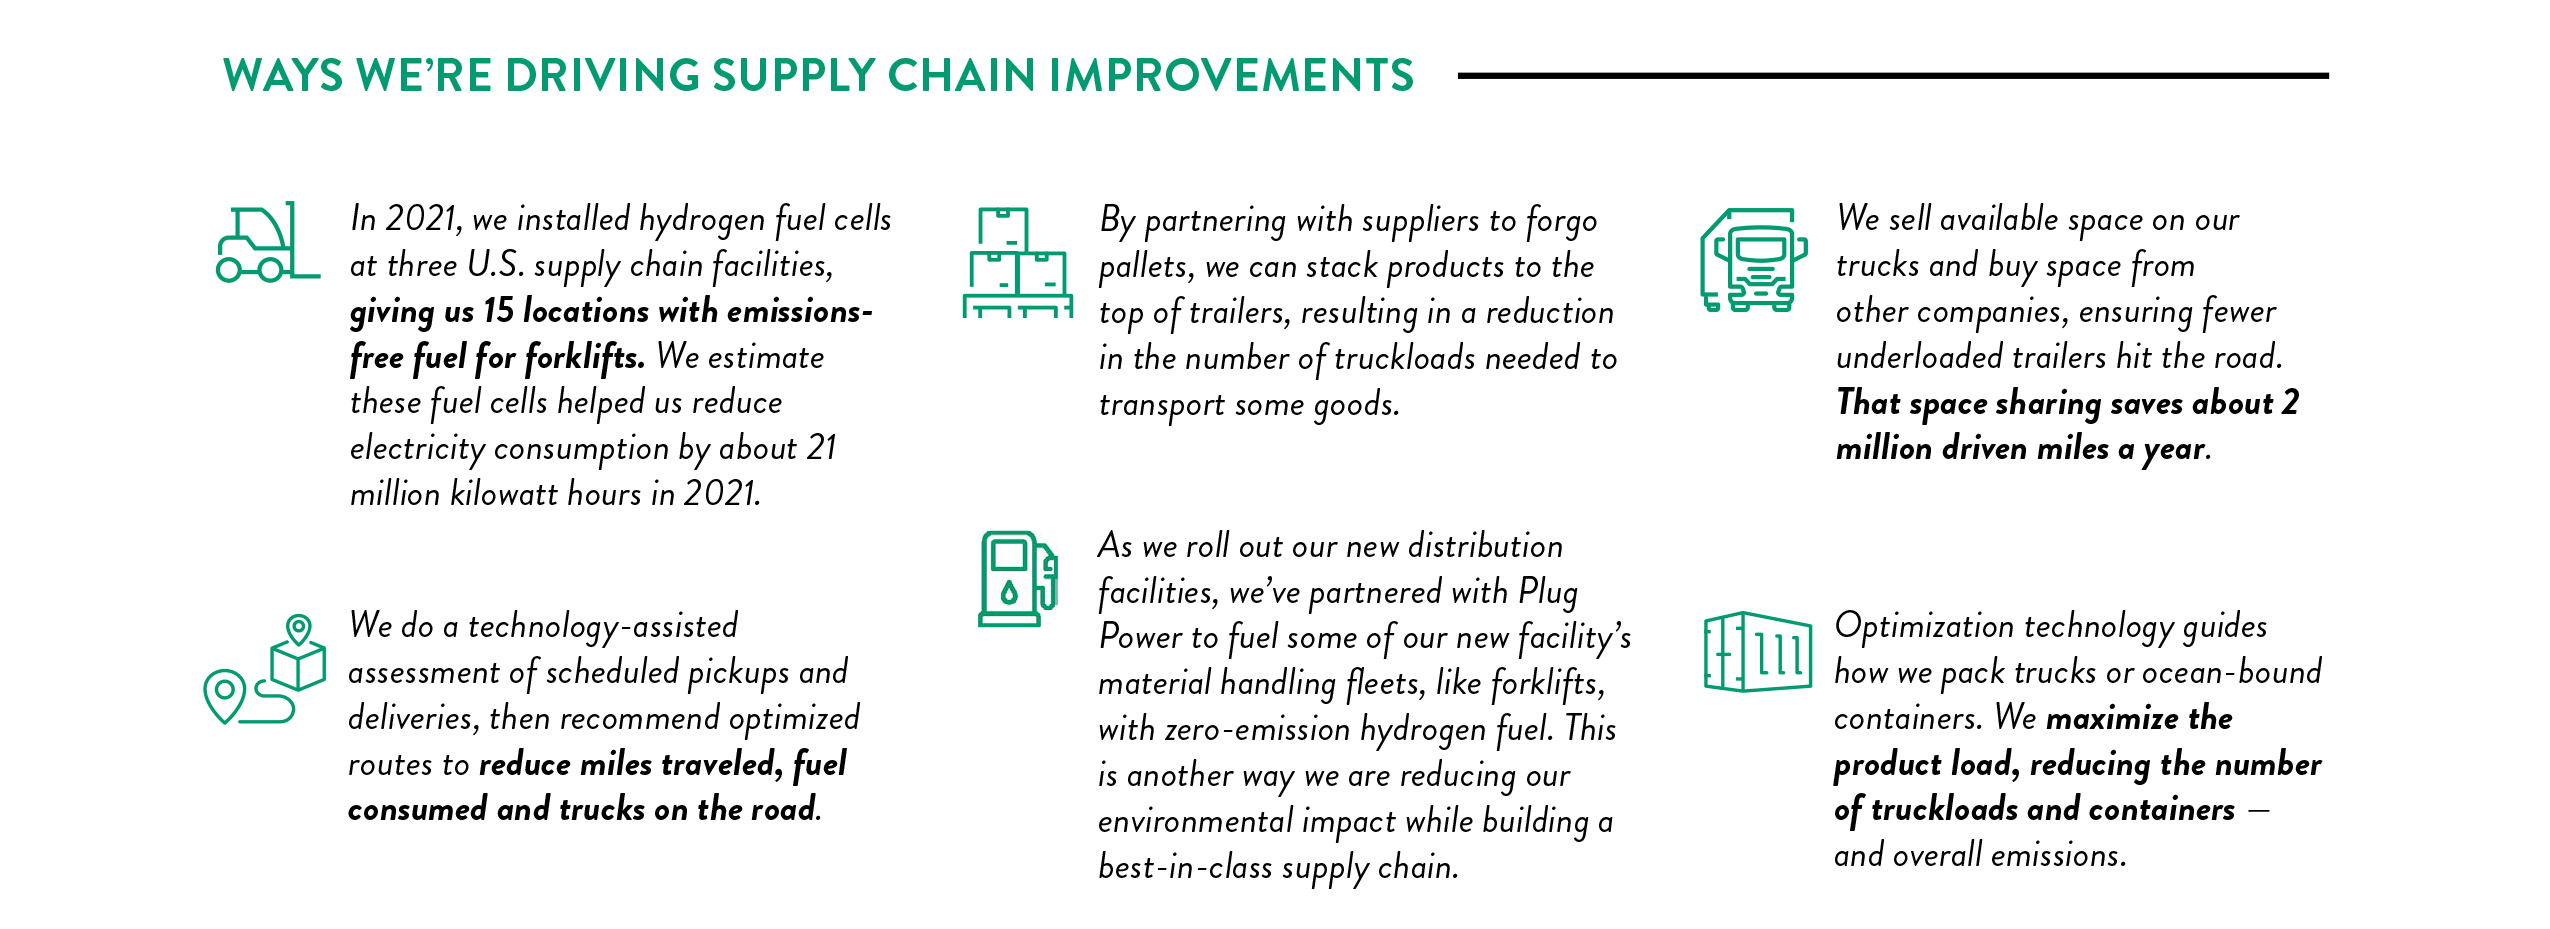 Ways we're driving supply chain improvements infographic